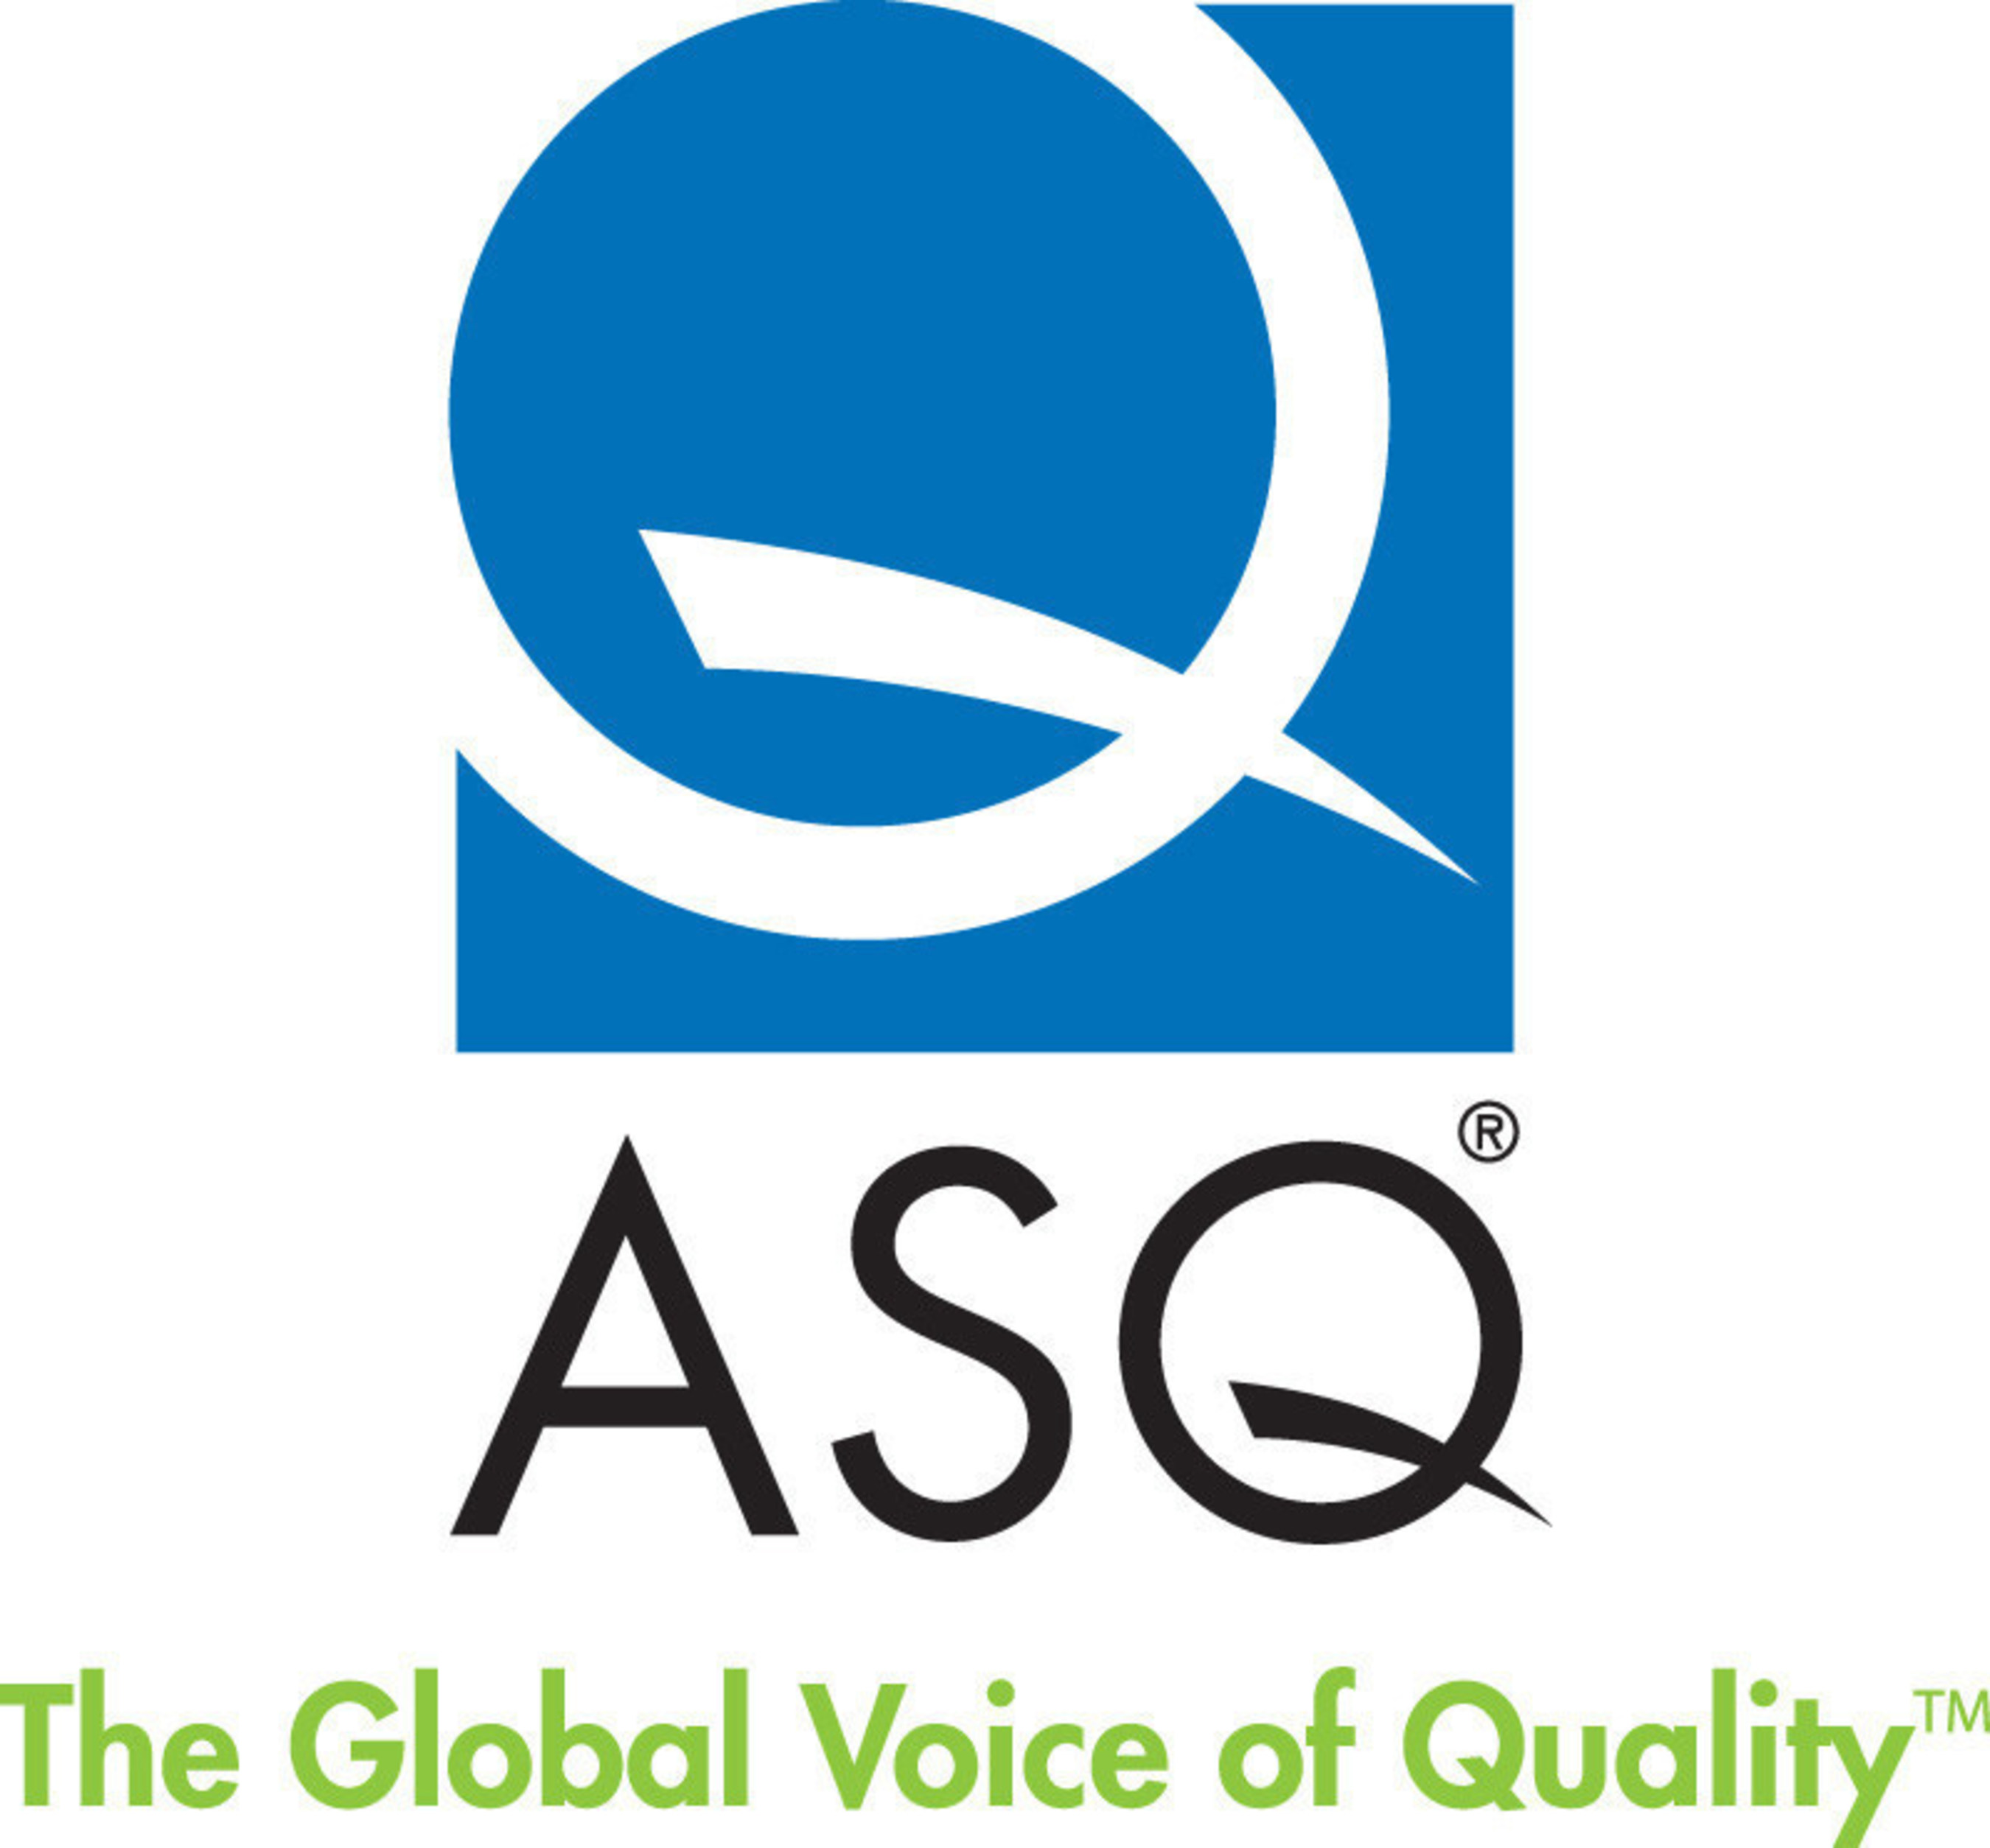 The ASQ presentations will be held in conjunction with UBM Canon at their East Coast trade shows taking place at the same venue, June 9-11.